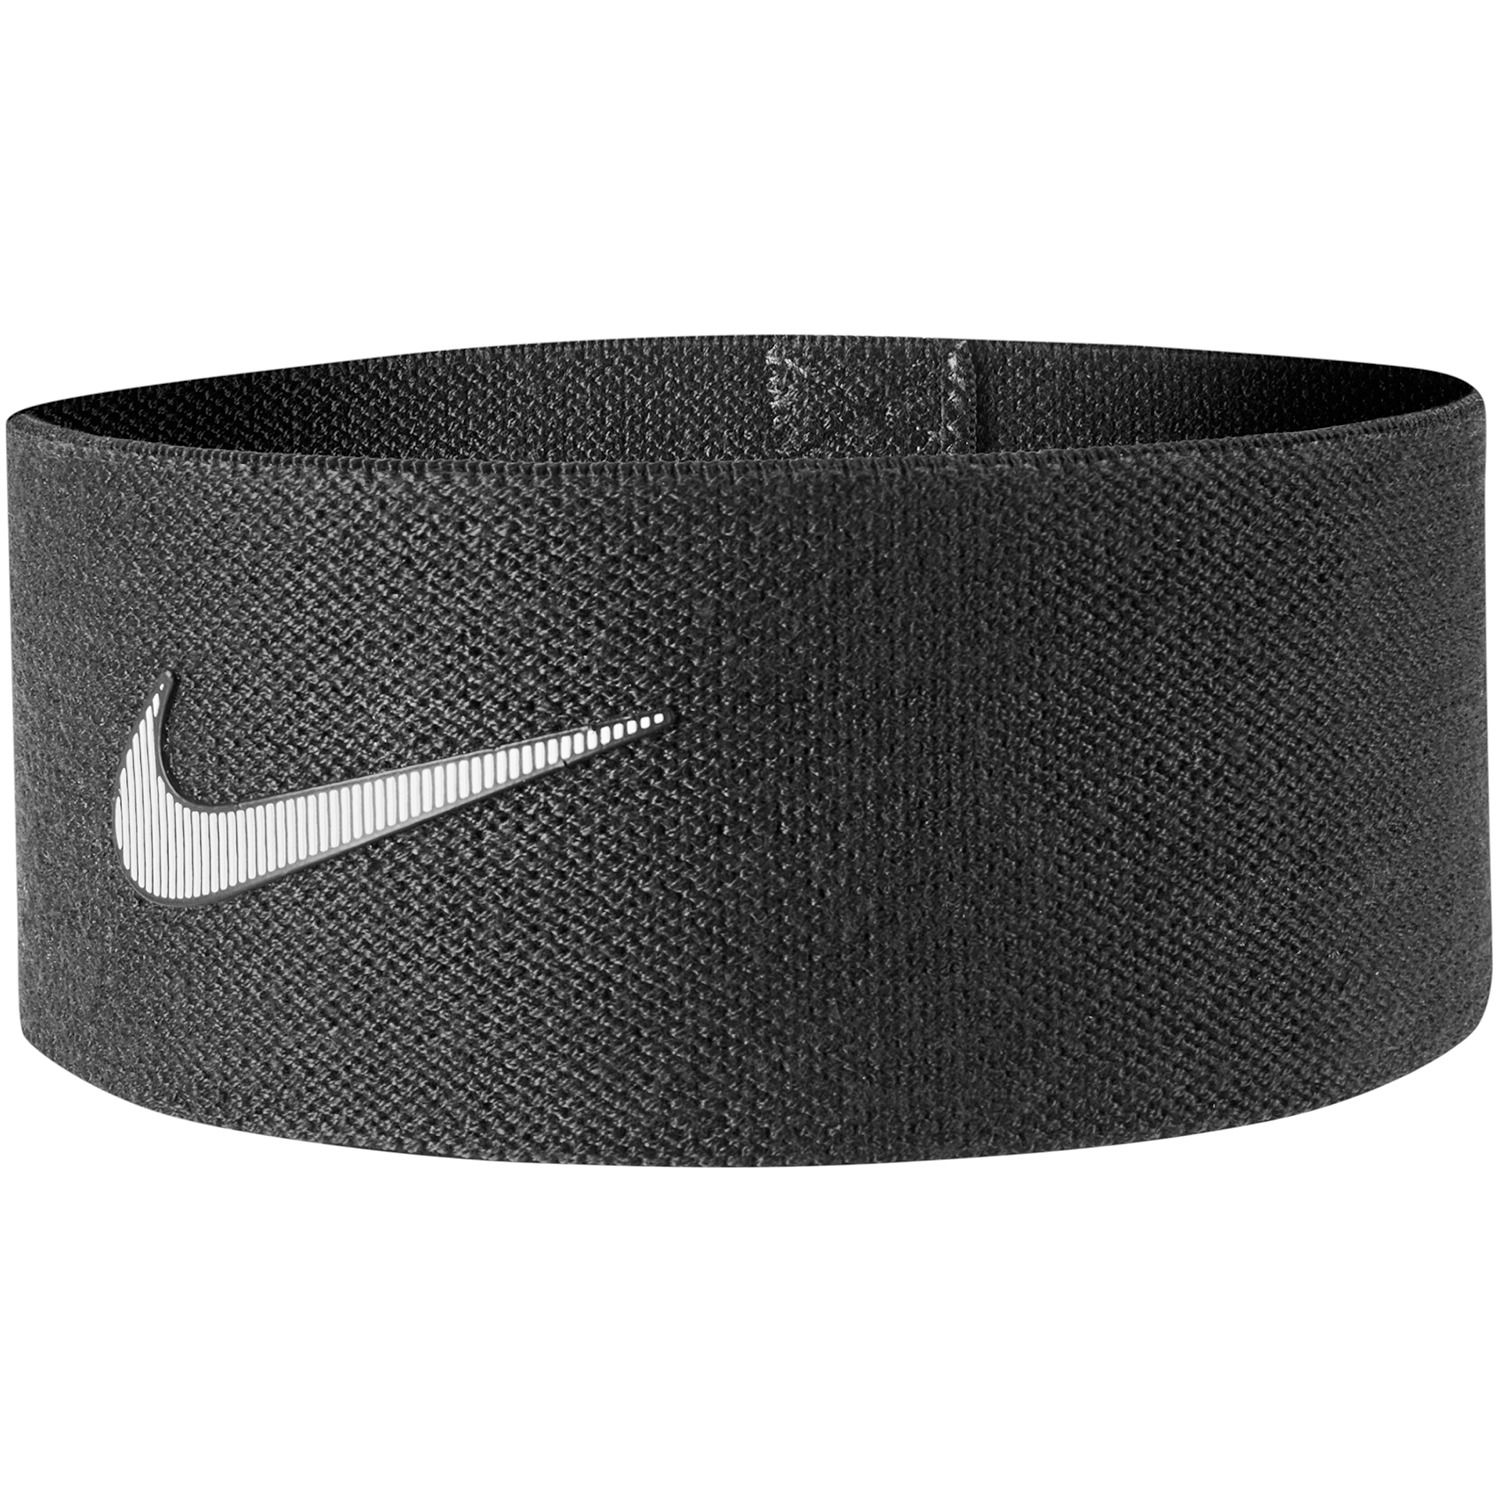 nike rubber bands